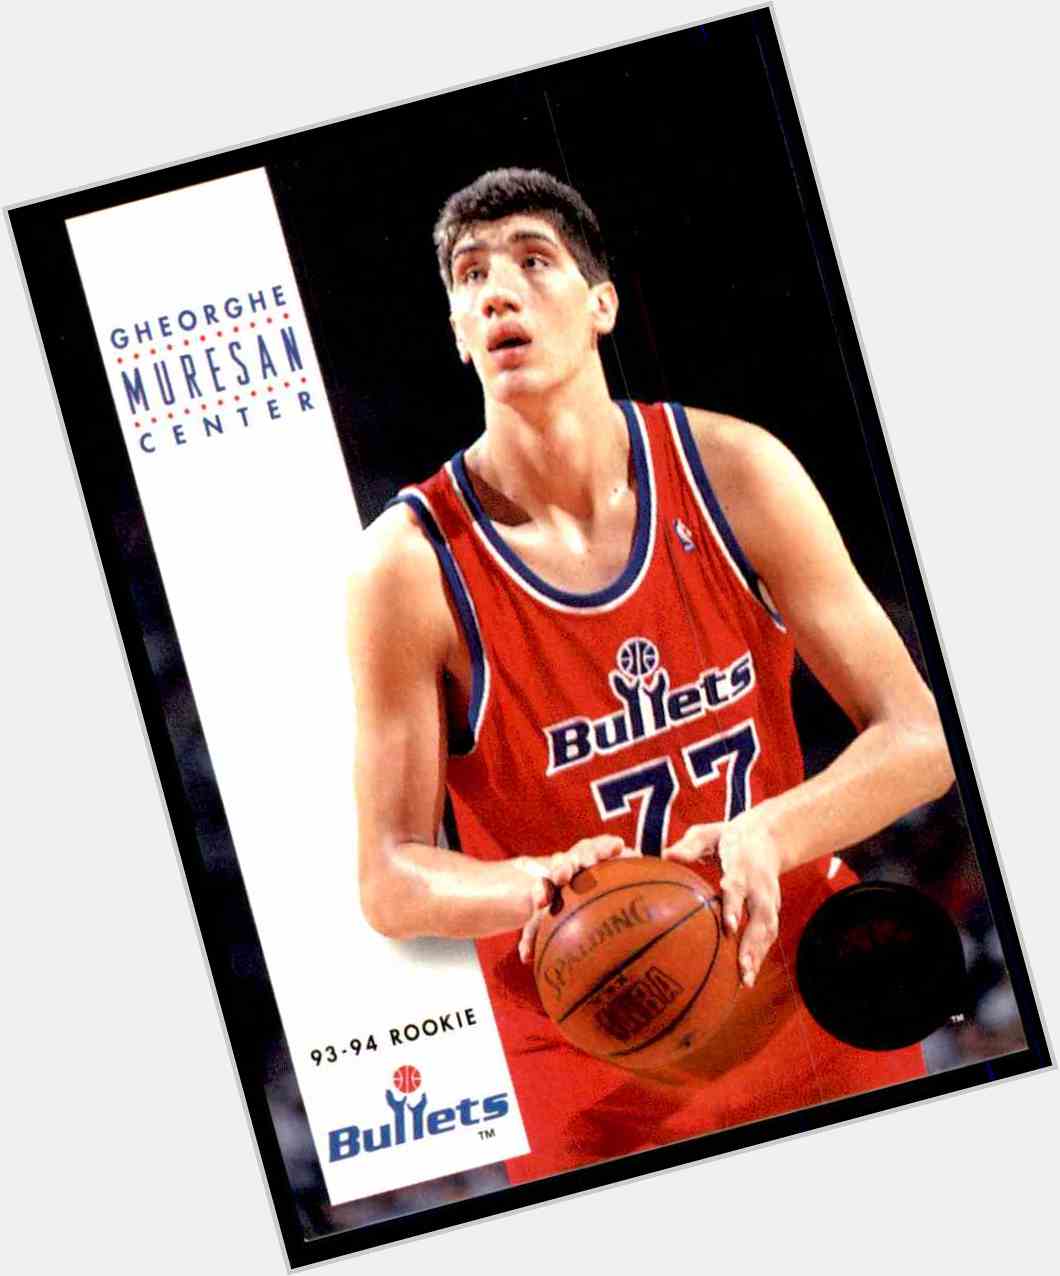 Happy Birthday Gheorghe Muresan!

Throw down a ridiculously tall athlete (7-foot or taller)! 